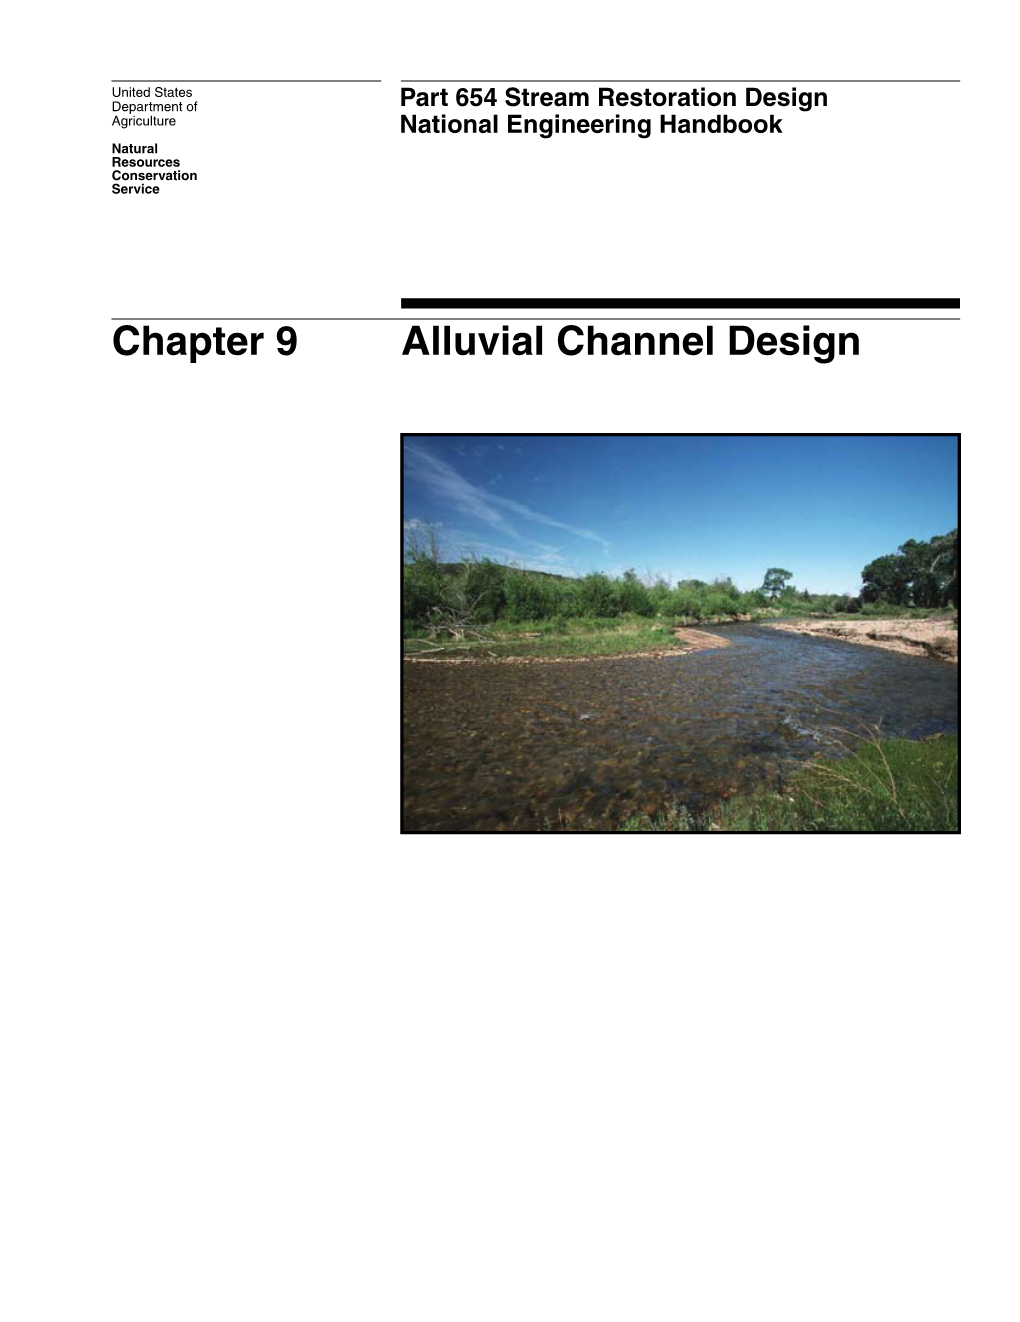 Chapter 9--Alluvial Channel Design